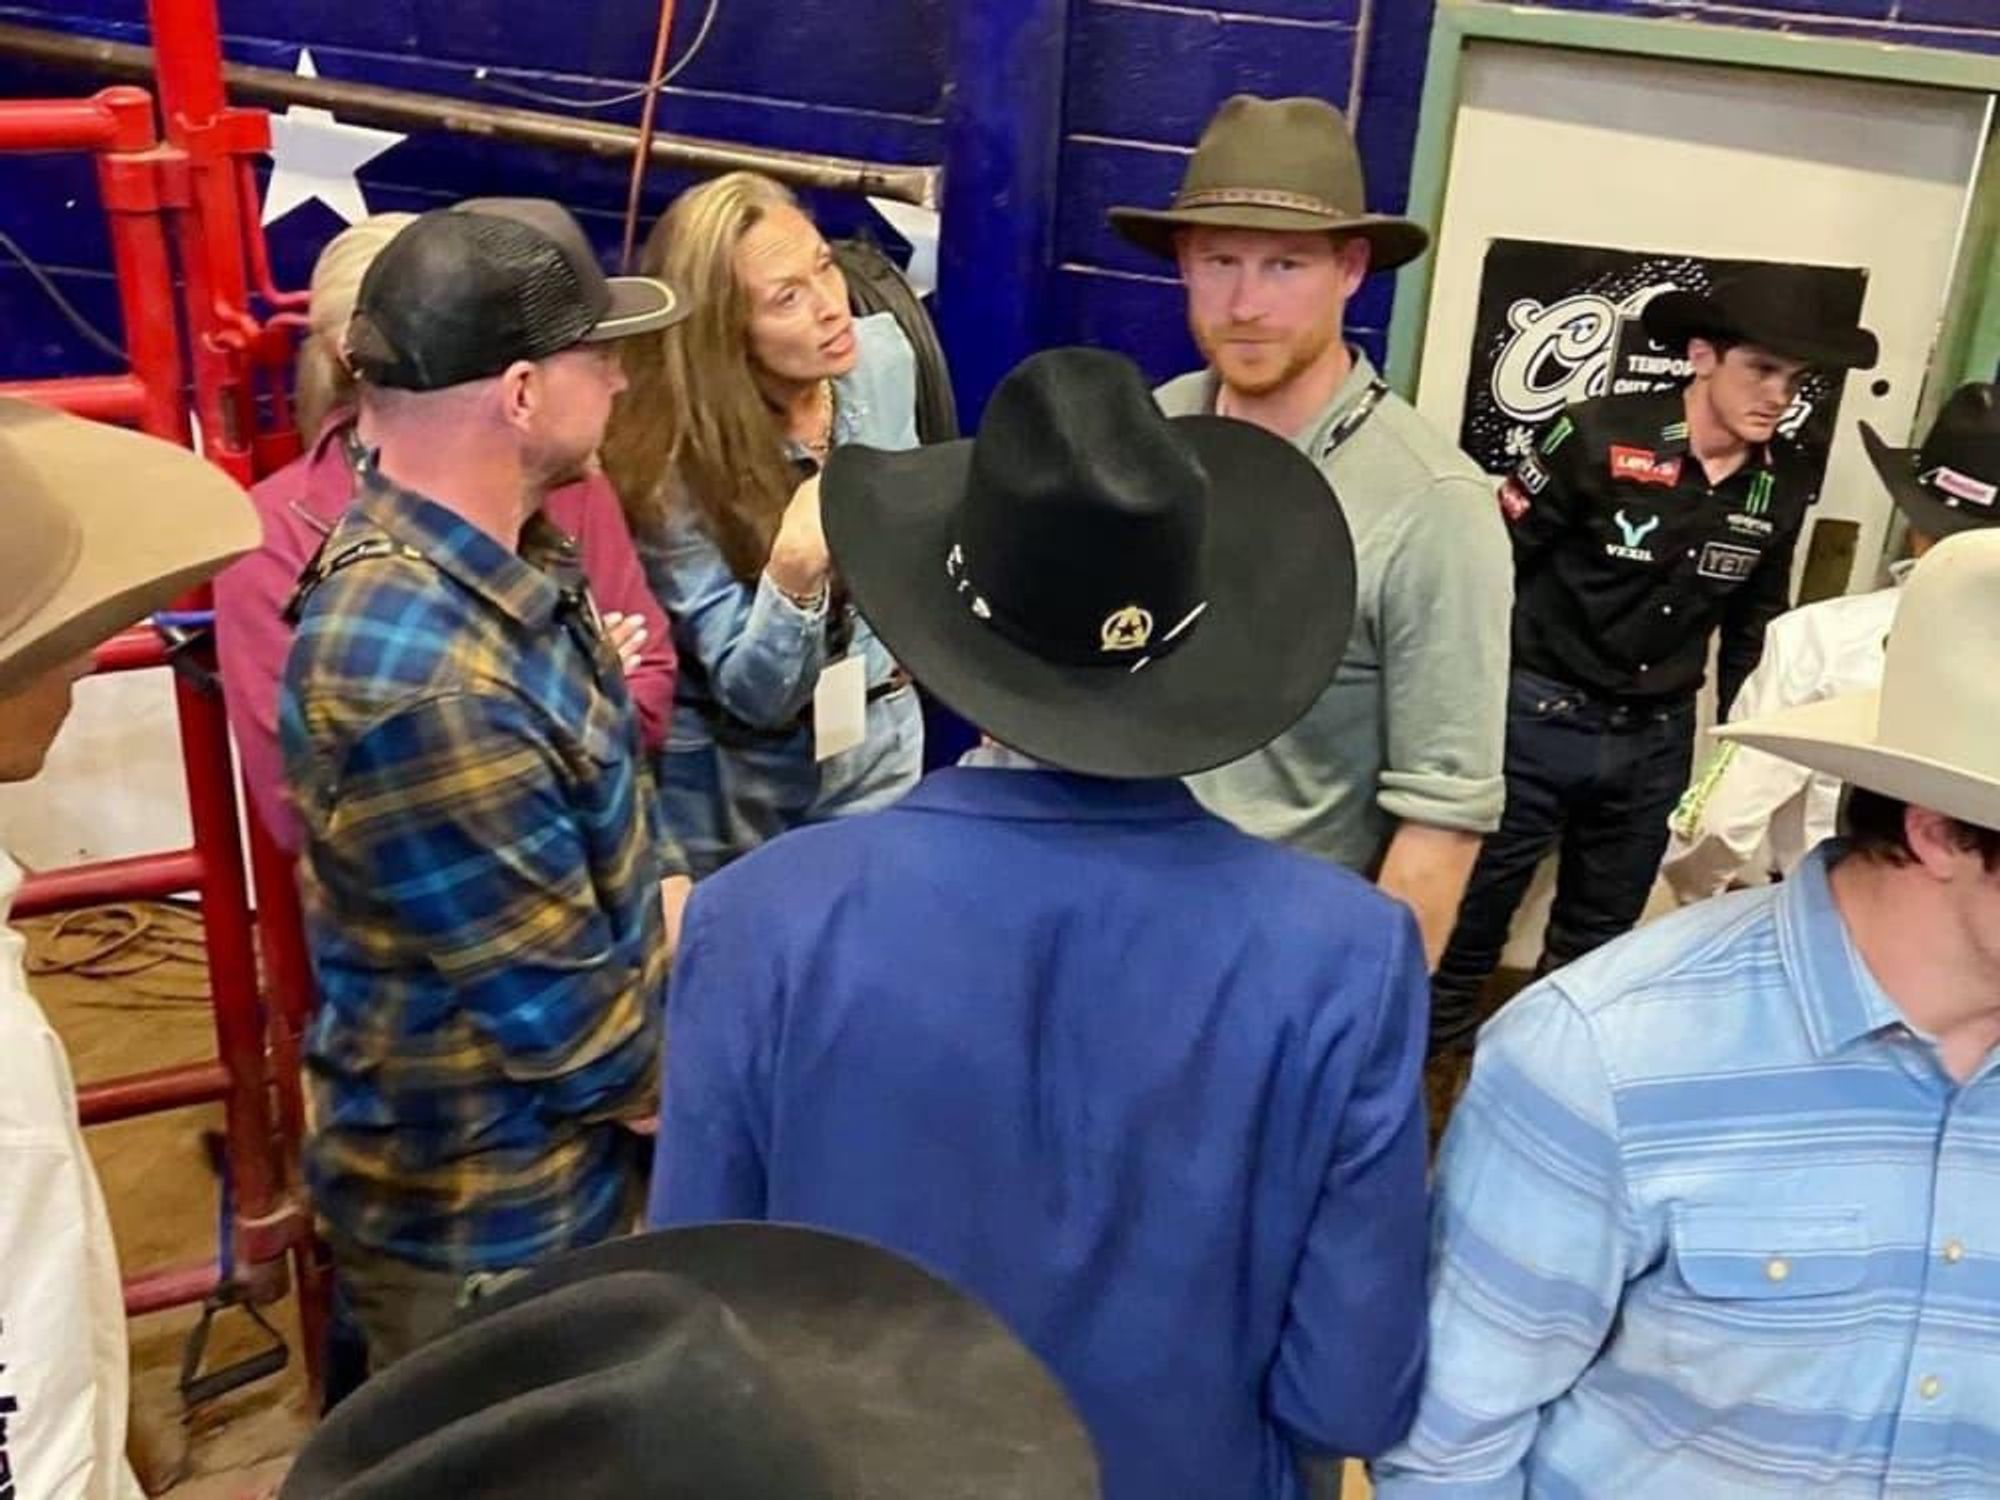 Prince Harry, Fort Worth Stockyards rodeo